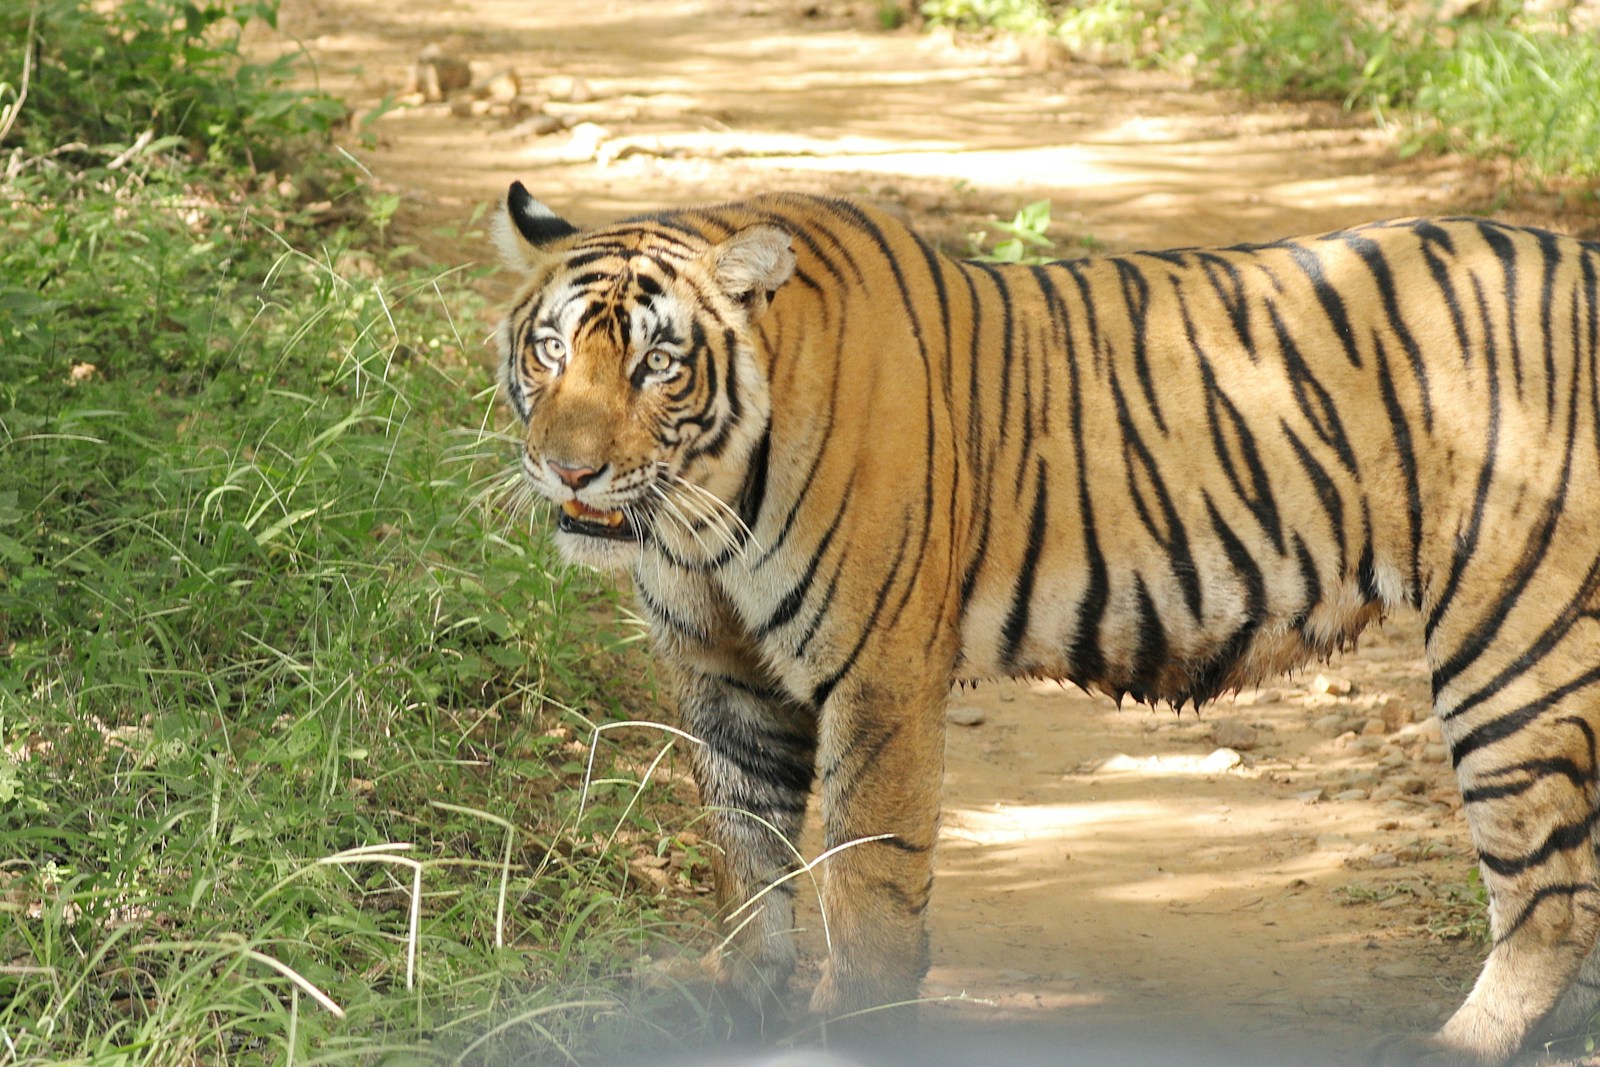 a tiger standing on a dirt road next to a lush green field